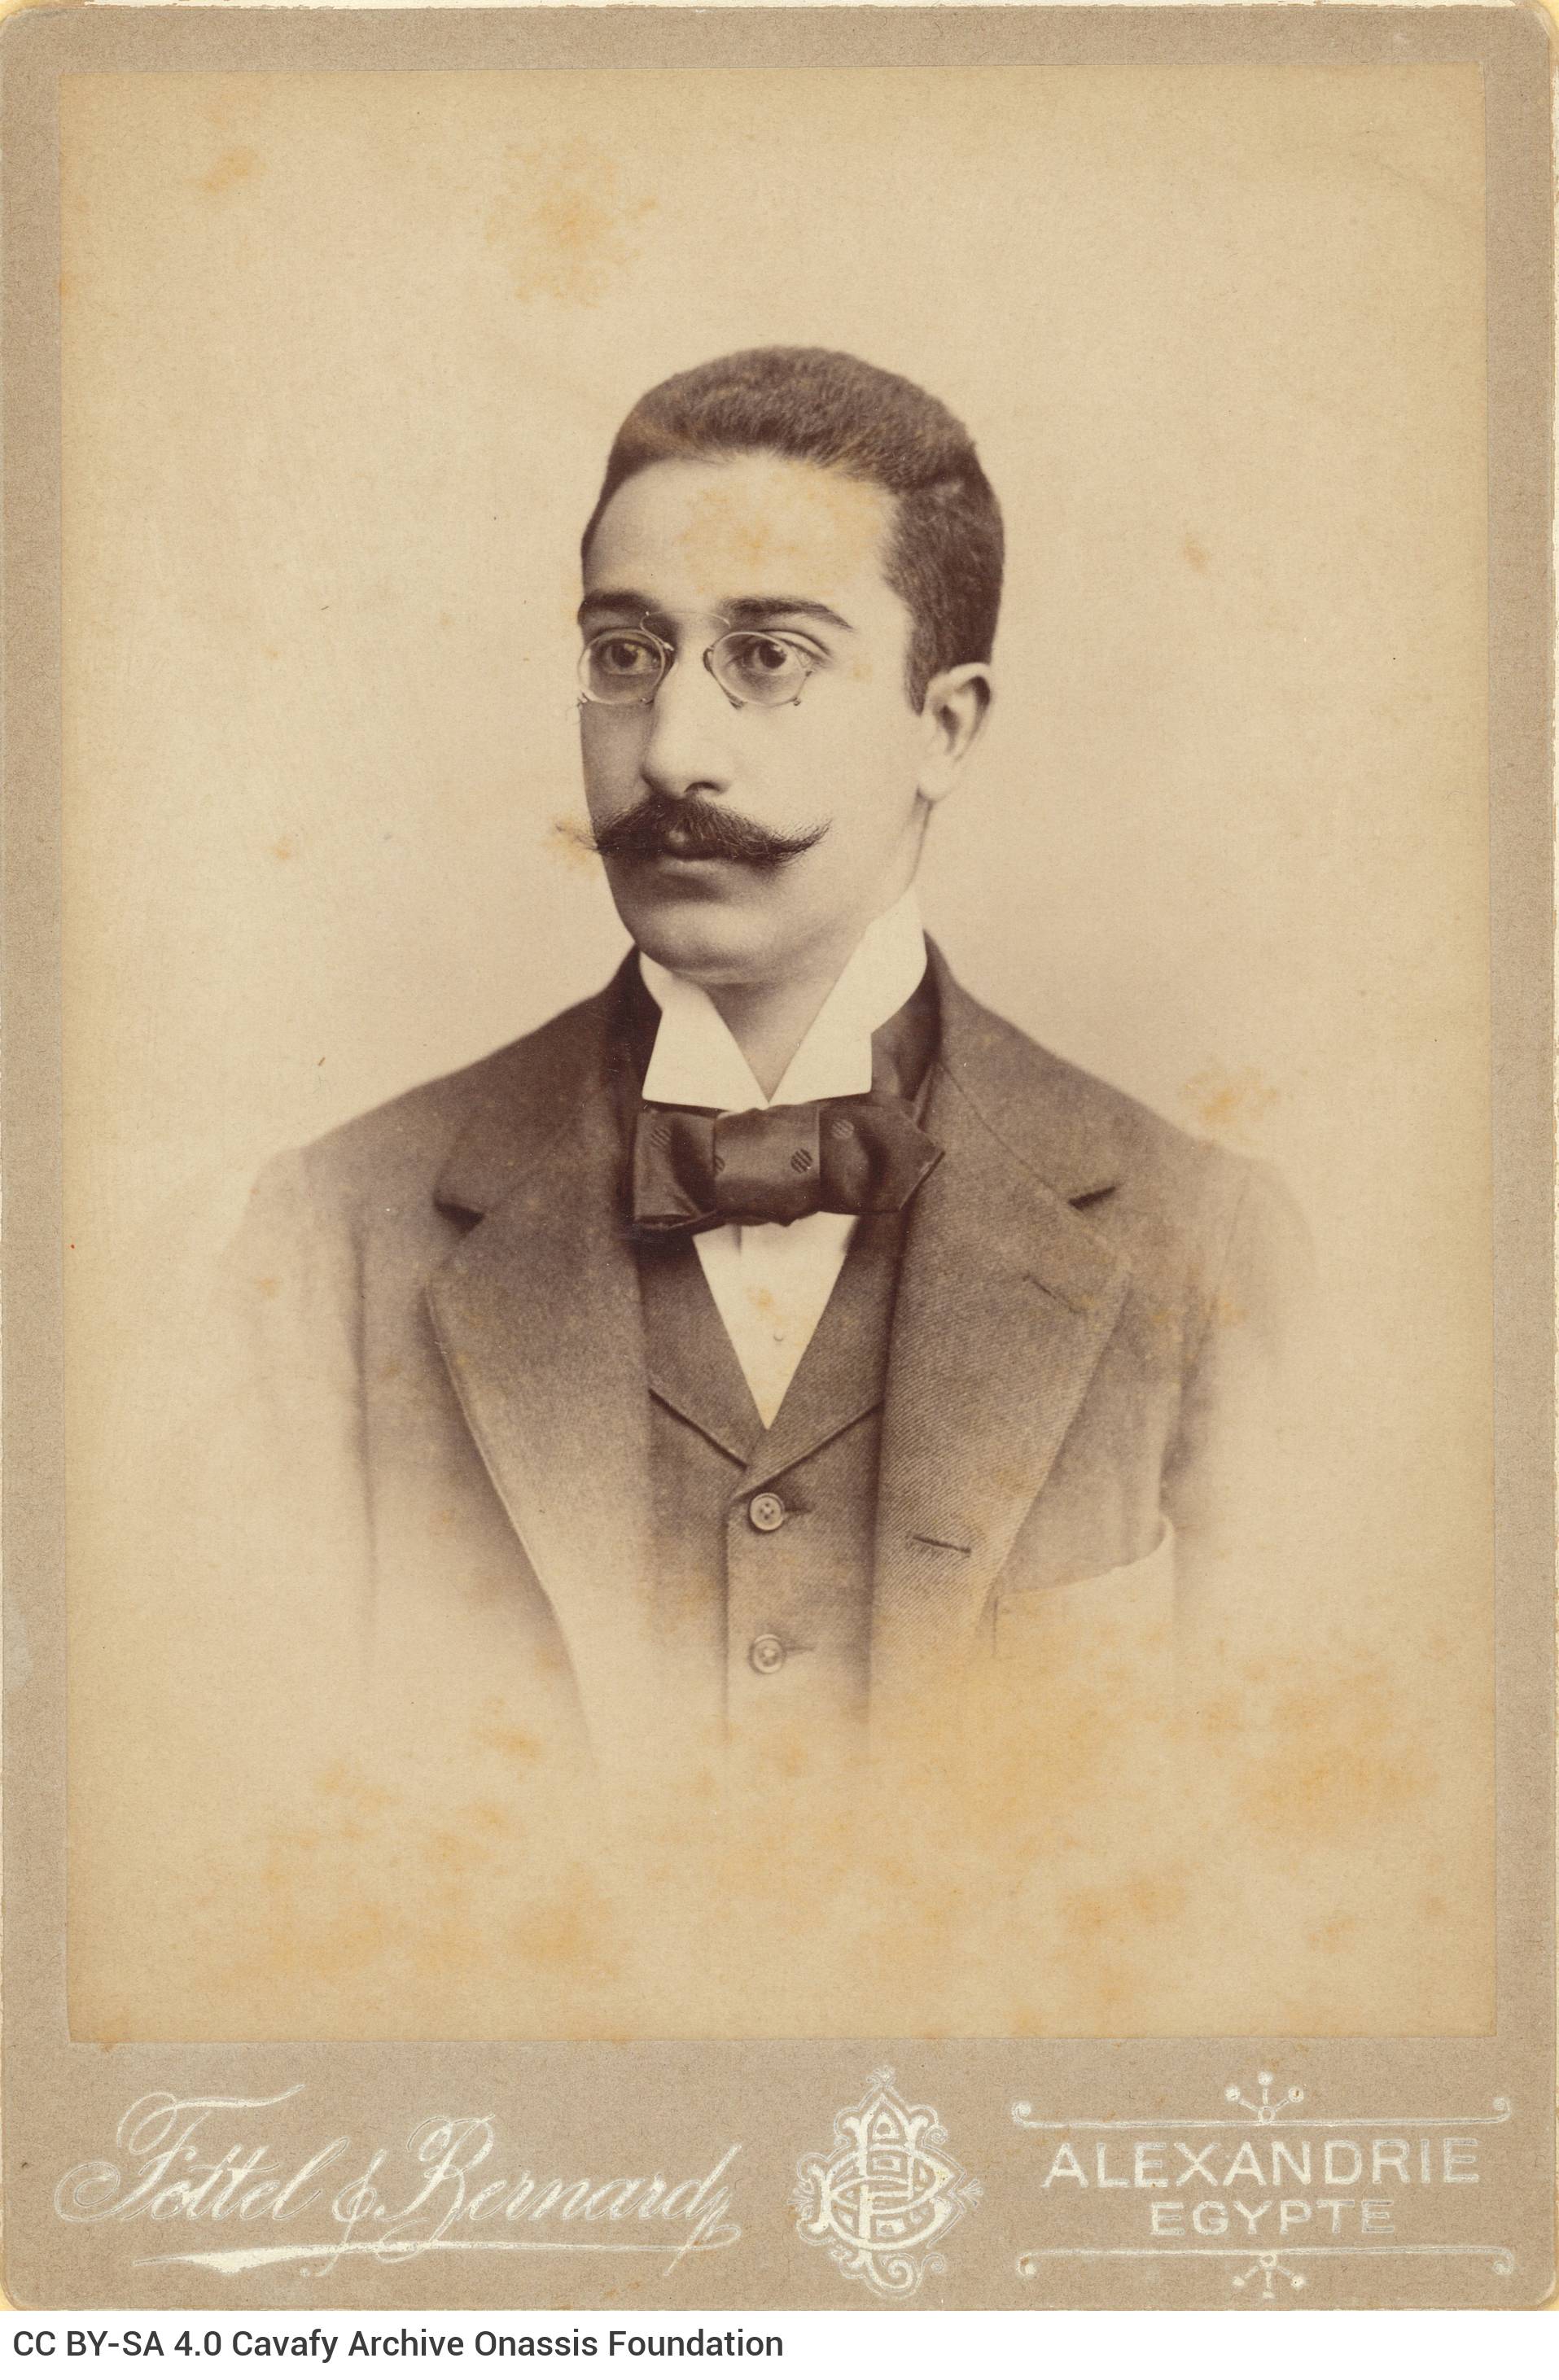 Undated photographic portrait of Cavafy by the photo shop of Fettel & Bernard in Alexandria, in seven copies. The poet has sh